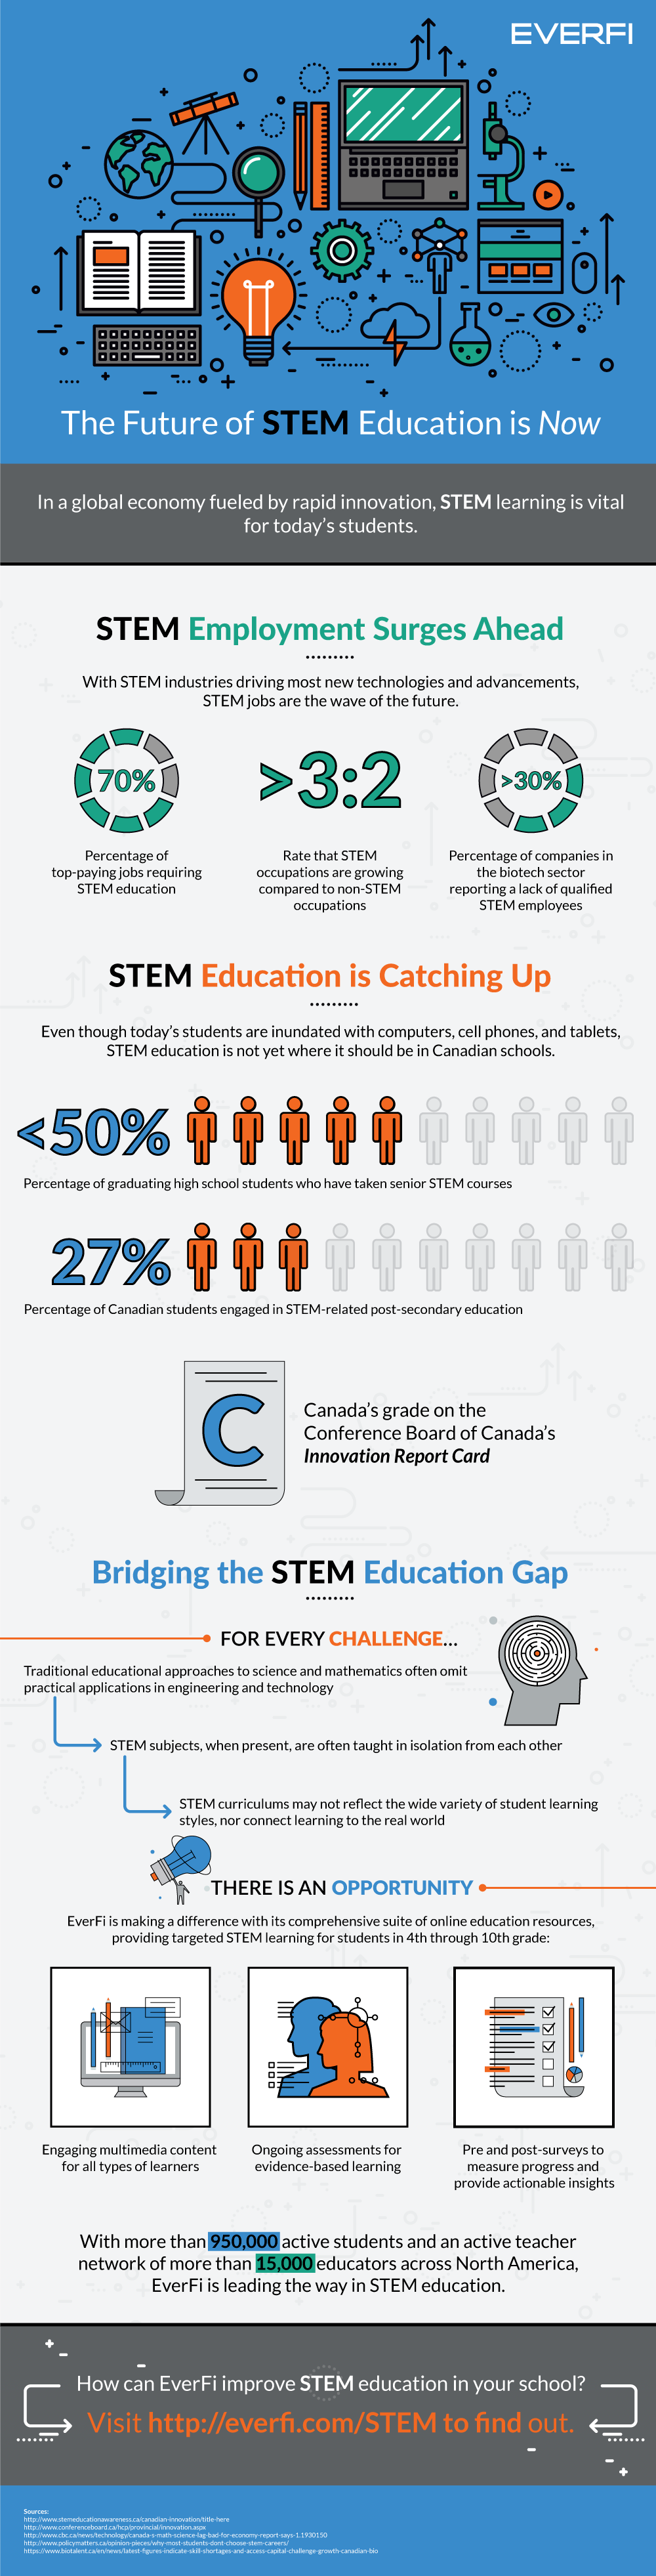 The Future of STEM Education is Now Infographic